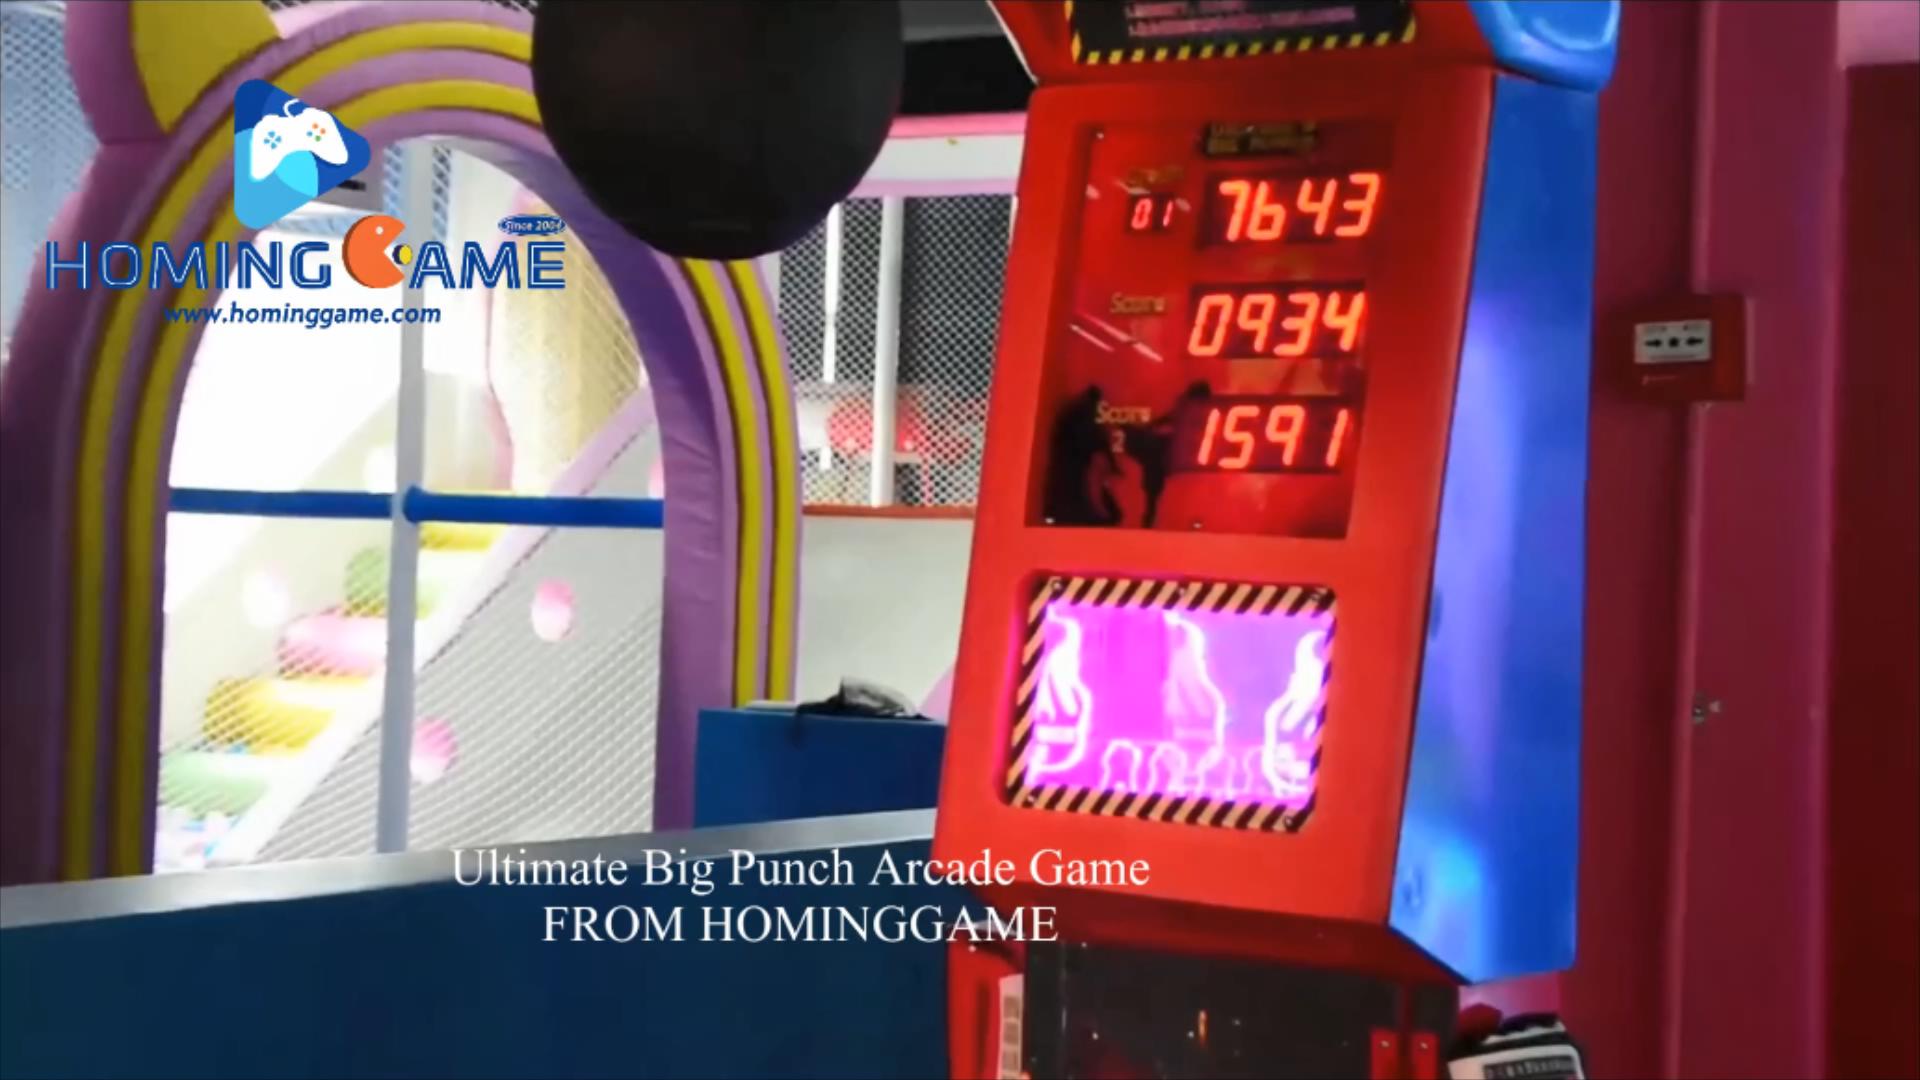 2020 Come To Game Center to Challenge Our HomingGame Popular Boxing Game Ultimate Big Punch Boxing Arcade Game Machine(Order Call Whatsapp:+8618688409495),ultimate big punch boxing arcade game machine,ultimate big punch boxing game machine,boxing game machine,boxing arcade game machine,ultimate big punch game machine,boxing machine,boxing game,boxing arcade game,boxing redemption game machine,lutiamte big punch payout cocola prize game machine,boxing prize game machine,game machine,arcade game machine,coin operated game machine,indoor game machine,electrical game machine,amusement park game equipment,game equipment,amusement machine,entertainment game machine,family entertainment game machine,sports game,sports game machine,redemption game machine,lottery game machine,prize game machine,boxing arcade,hominggame,www.gametube.hk,hominggame game machine,hominggame boxing machine,ultimate big punch boxing arcade game